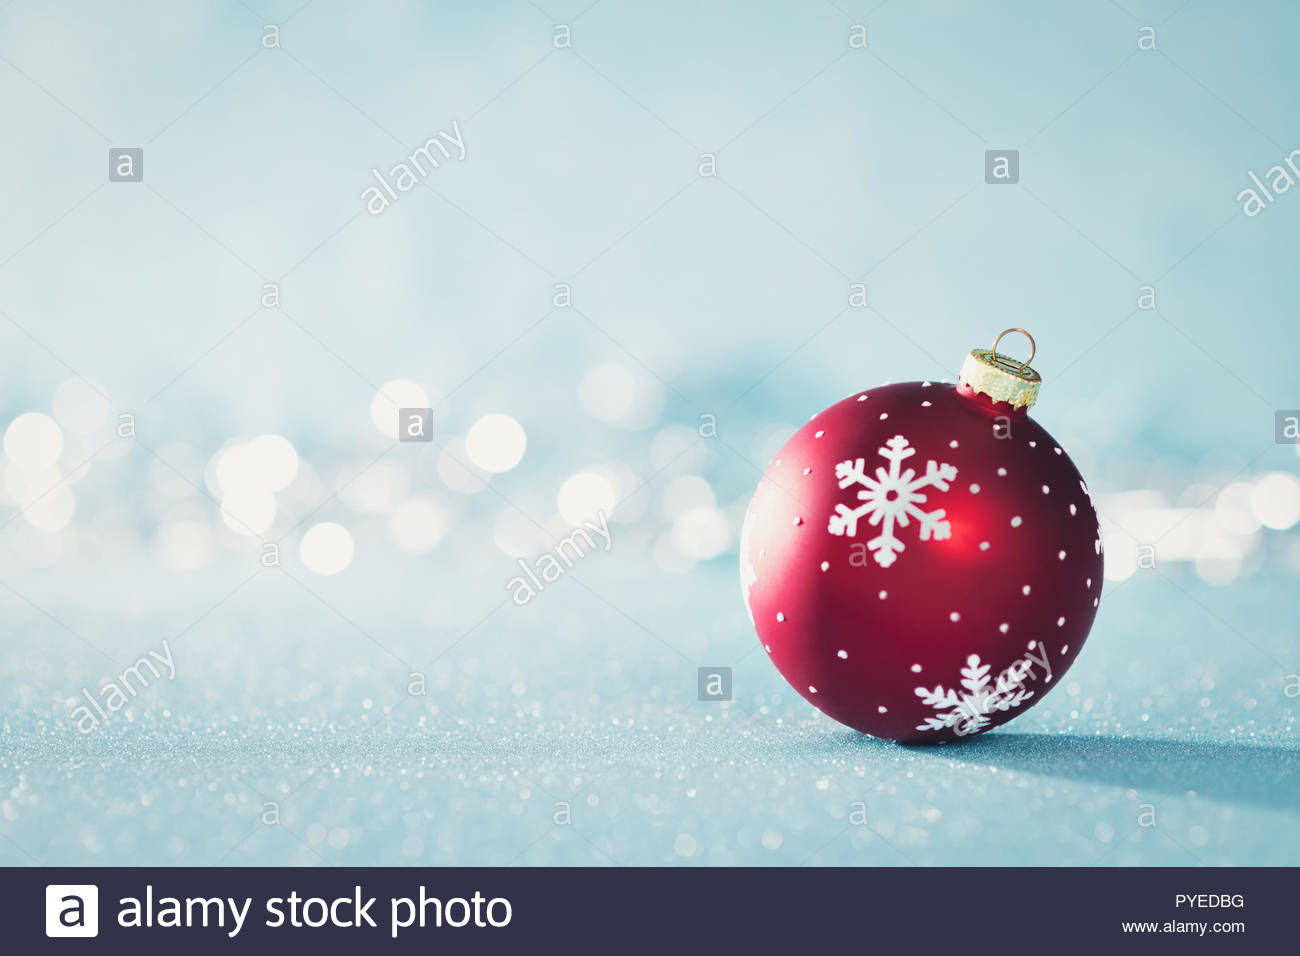 Bright Red Christmas Bauble in Winter Wonderland Blue Christmas